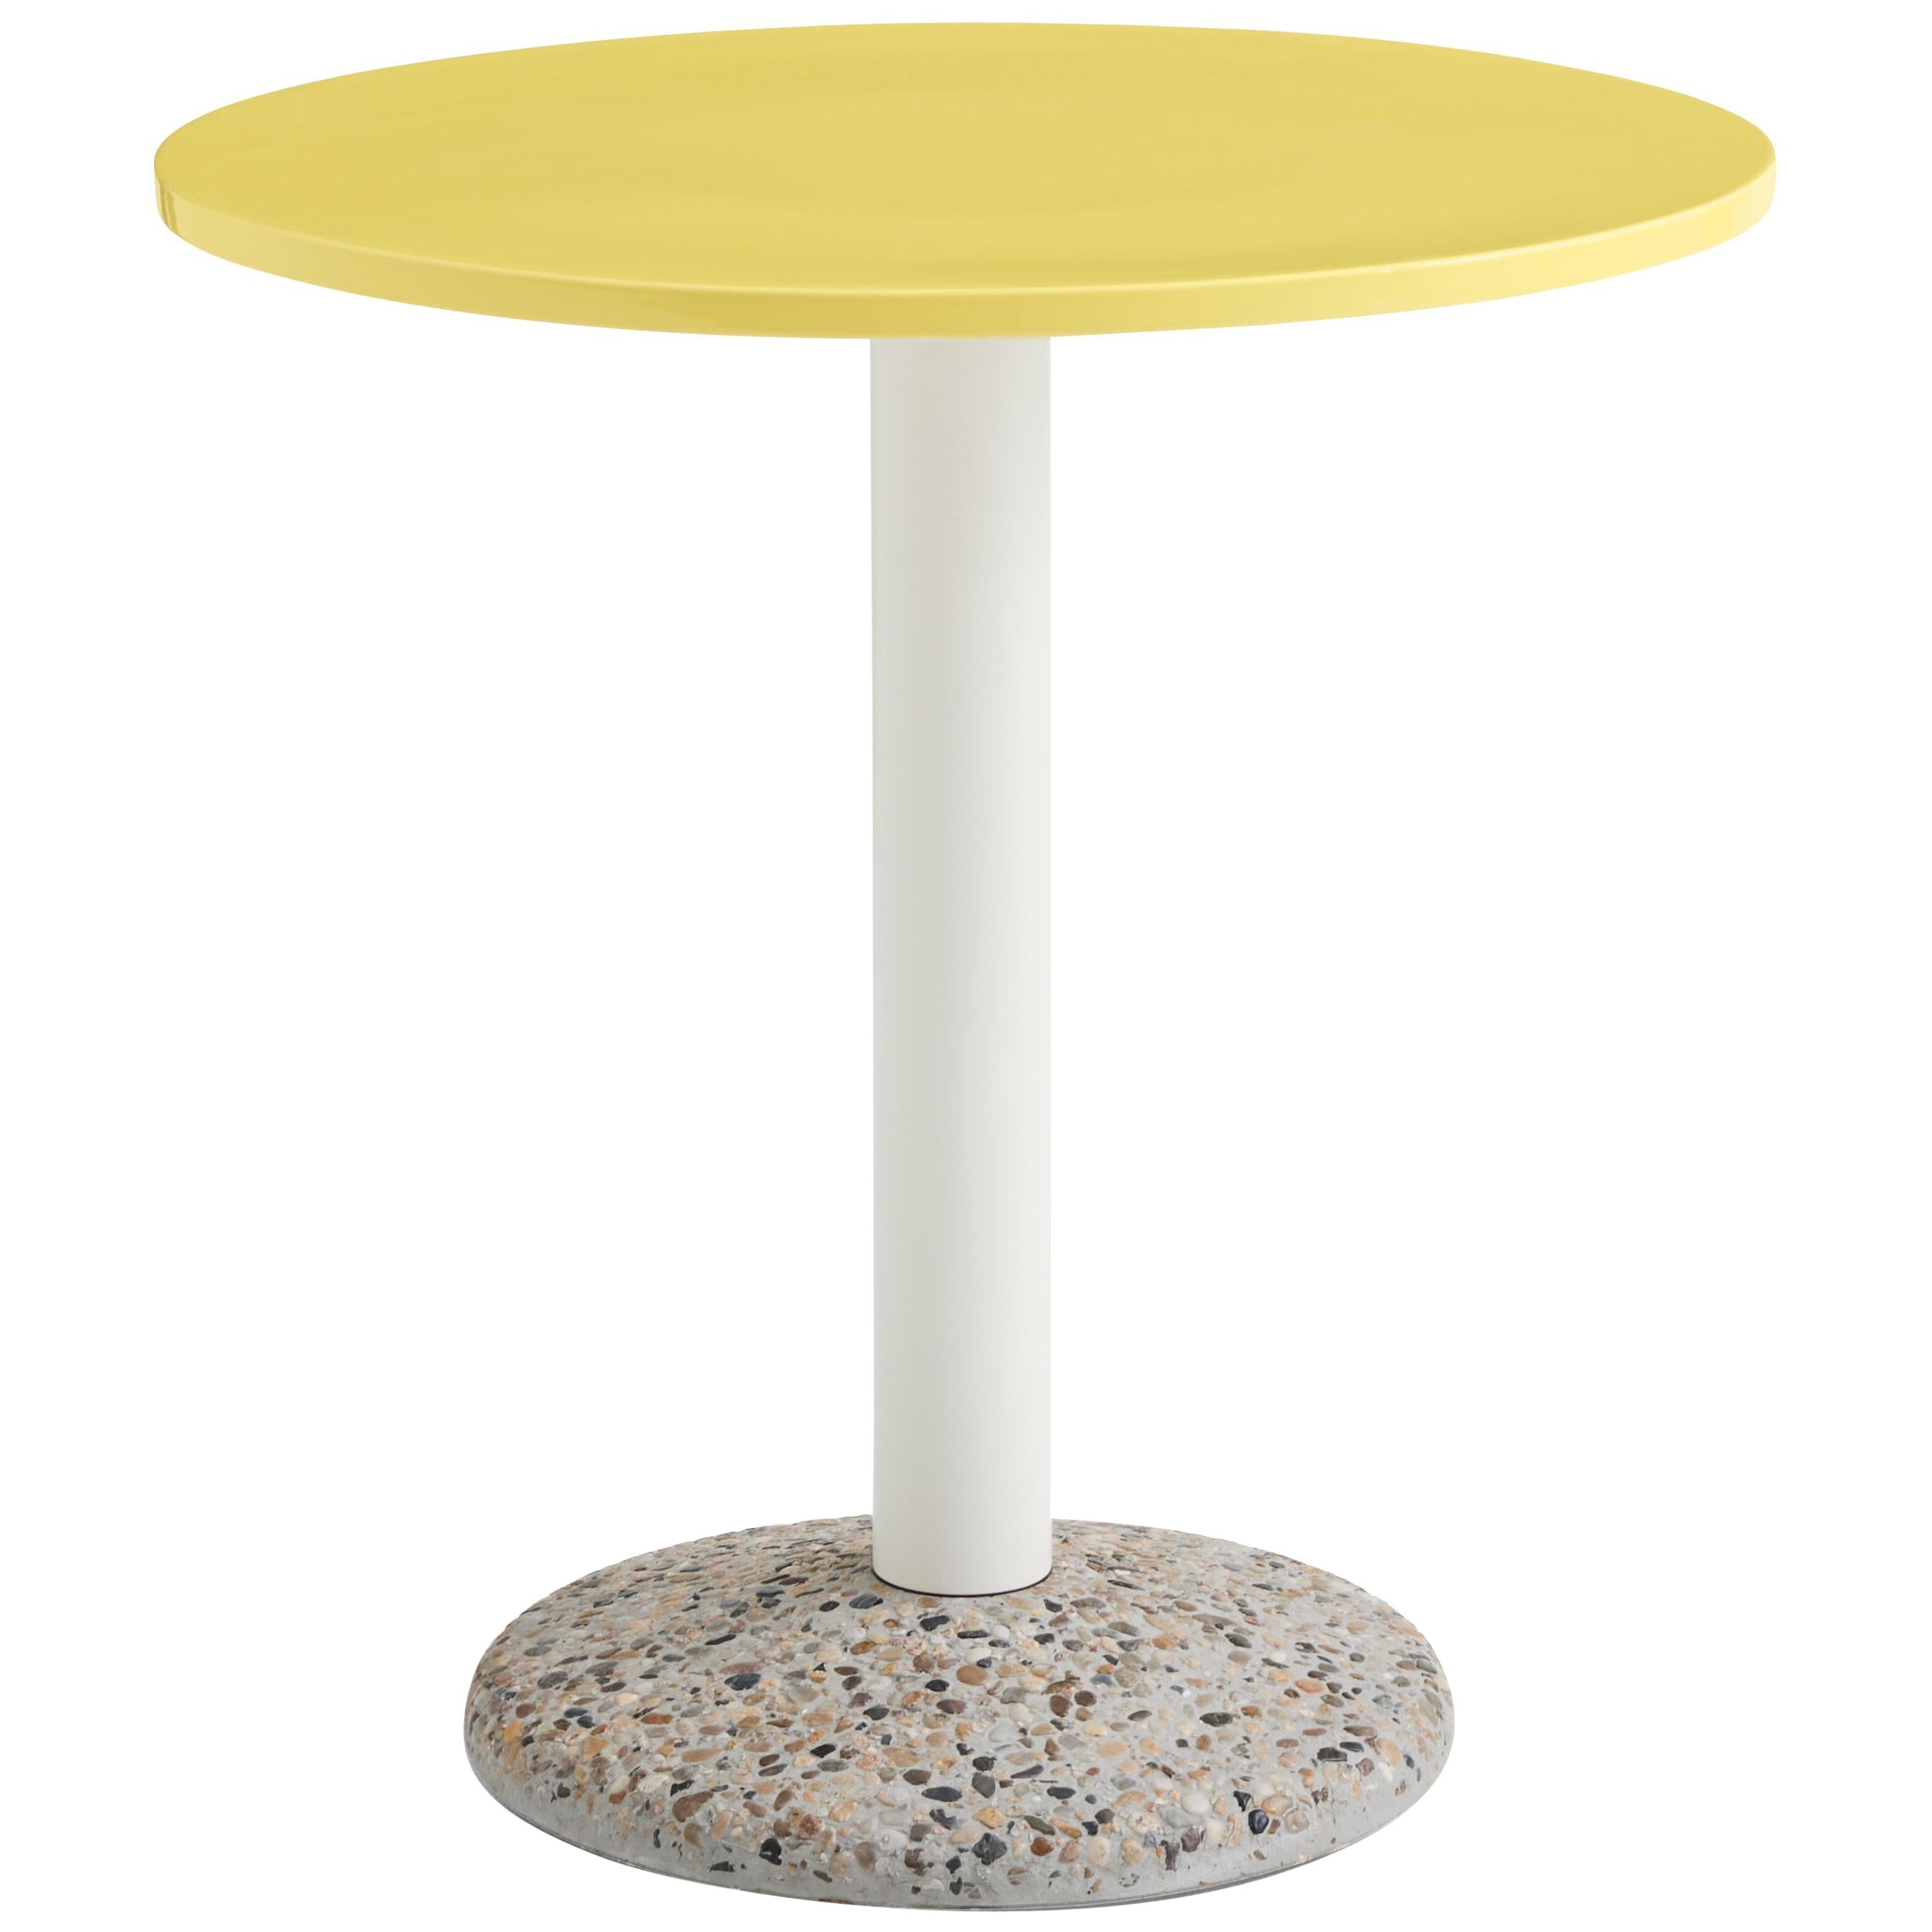 Ceramic Table Ø70, Outdoor-Bright Yellow Porcelain-by Muller Van Severen for Hay For Sale